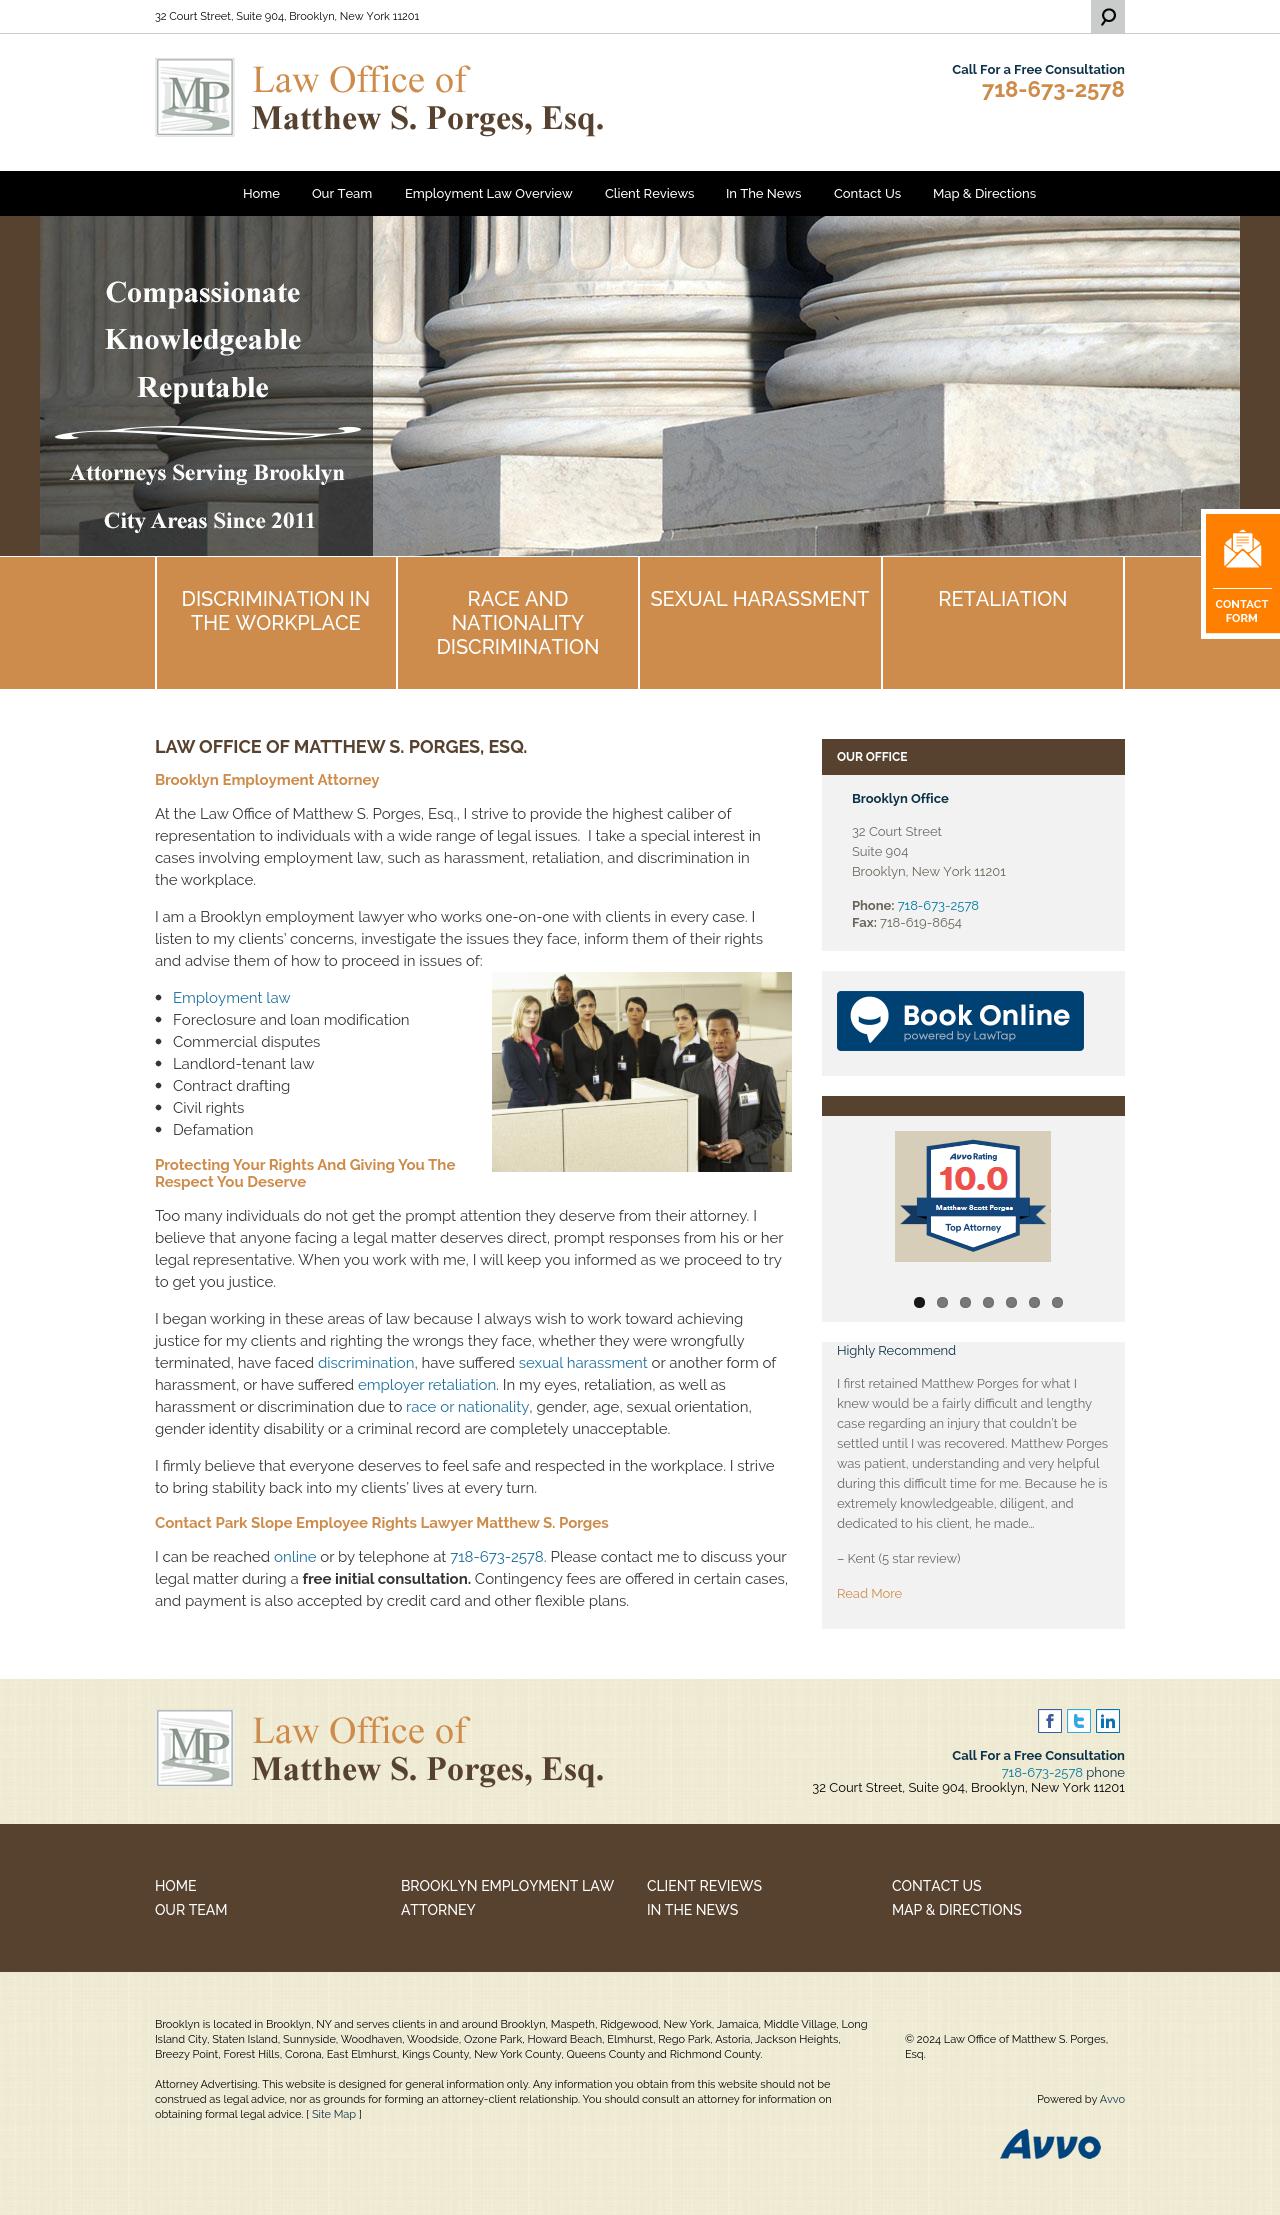 Law Office of Matthew S. Porges, Esq. - Brooklyn NY Lawyers